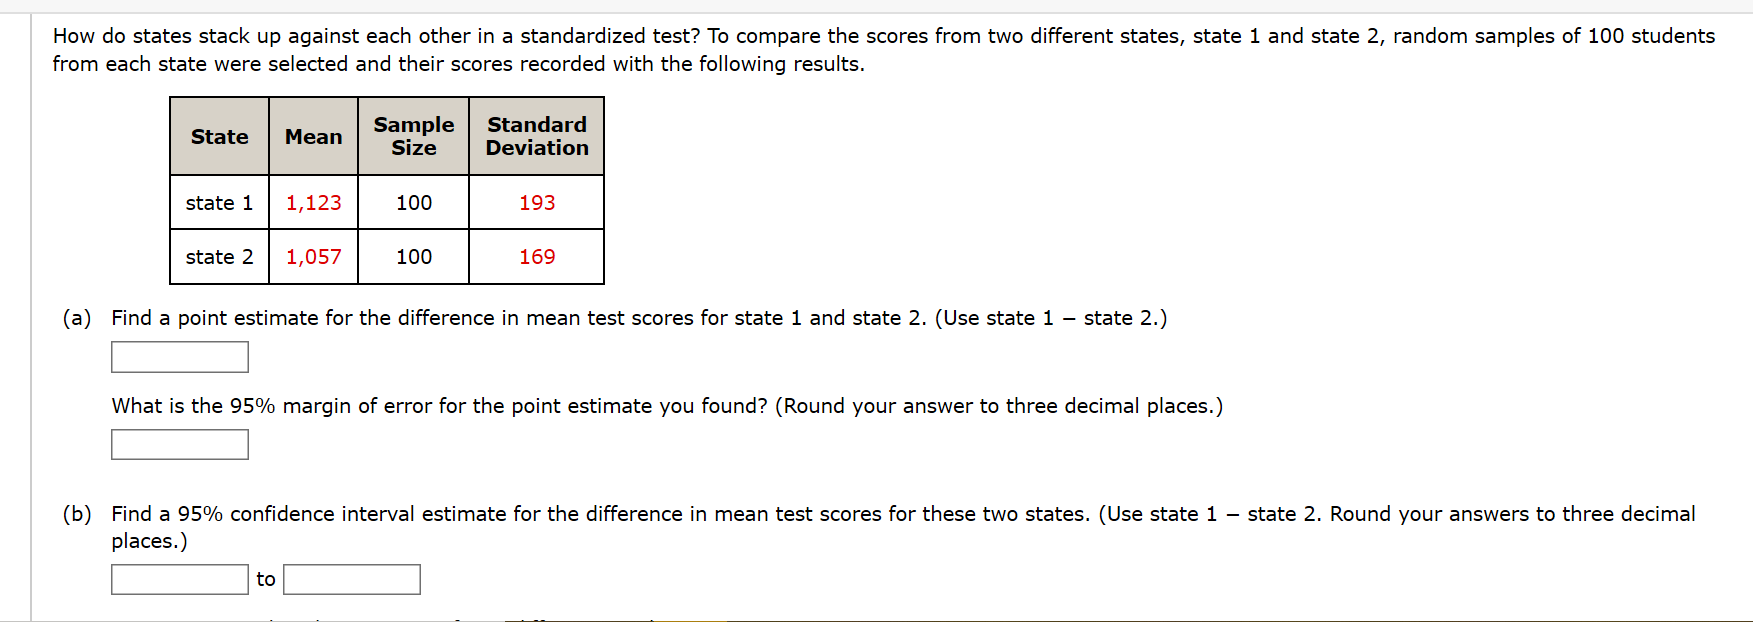 How do states stack up against each other in a standardized test? To compare the scores from two different states, state 1 and state 2, random samples of 100 students
from each state were selected and their scores recorded with the following results.
Sample
Size
Standard
Deviation
State
Mean
state 1
1,123
100
193
state 2
1,057
100
169
(a) Find a point estimate for the difference in mean test scores for state 1 and state 2. (Use state 1 – state 2.)
What is the 95% margin of error for the point estimate you found? (Round your answer to three decimal places.)
(b) Find a 95% confidence interval estimate for the difference in mean test scores for these two states. (Use state 1 – state 2. Round your answers to three decimal
places.)
to
